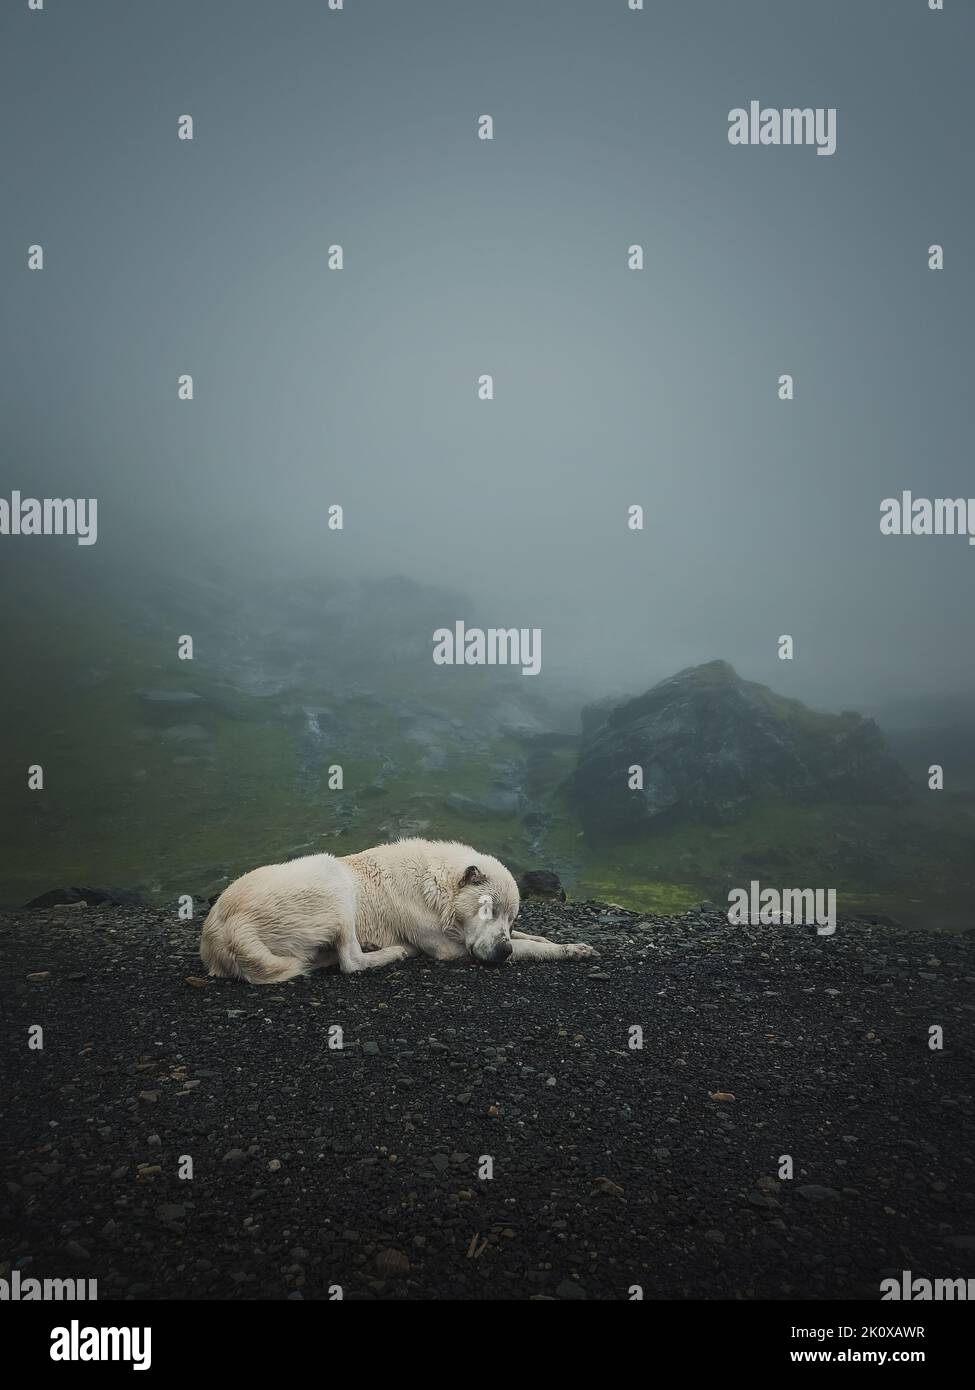 Moody and silent scene with a white, wolf like dog sleeping outdoors on the top of Transfagarasan mountain. Big shepherd hound in romania Carpathians, Stock Photo